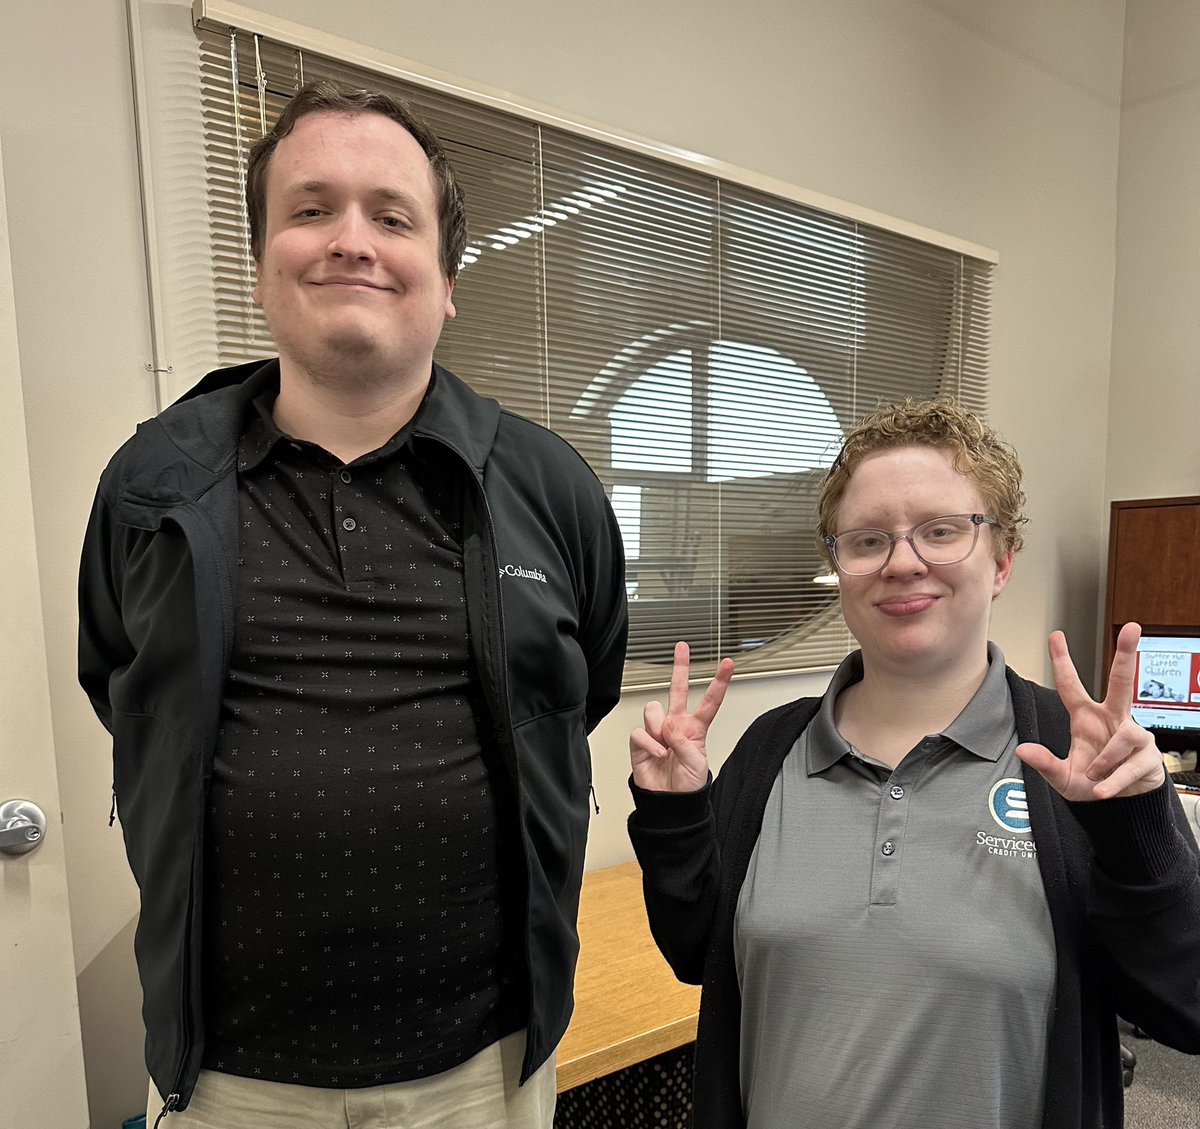 Meet Grant and Lizzie. Grant came to job shadow with our staff today as we filmed Lizzie who works with our friends at @ServiceOne_CU here in Bowling Green. Stay tuned for our next video alert featuring Lizzie on the job!